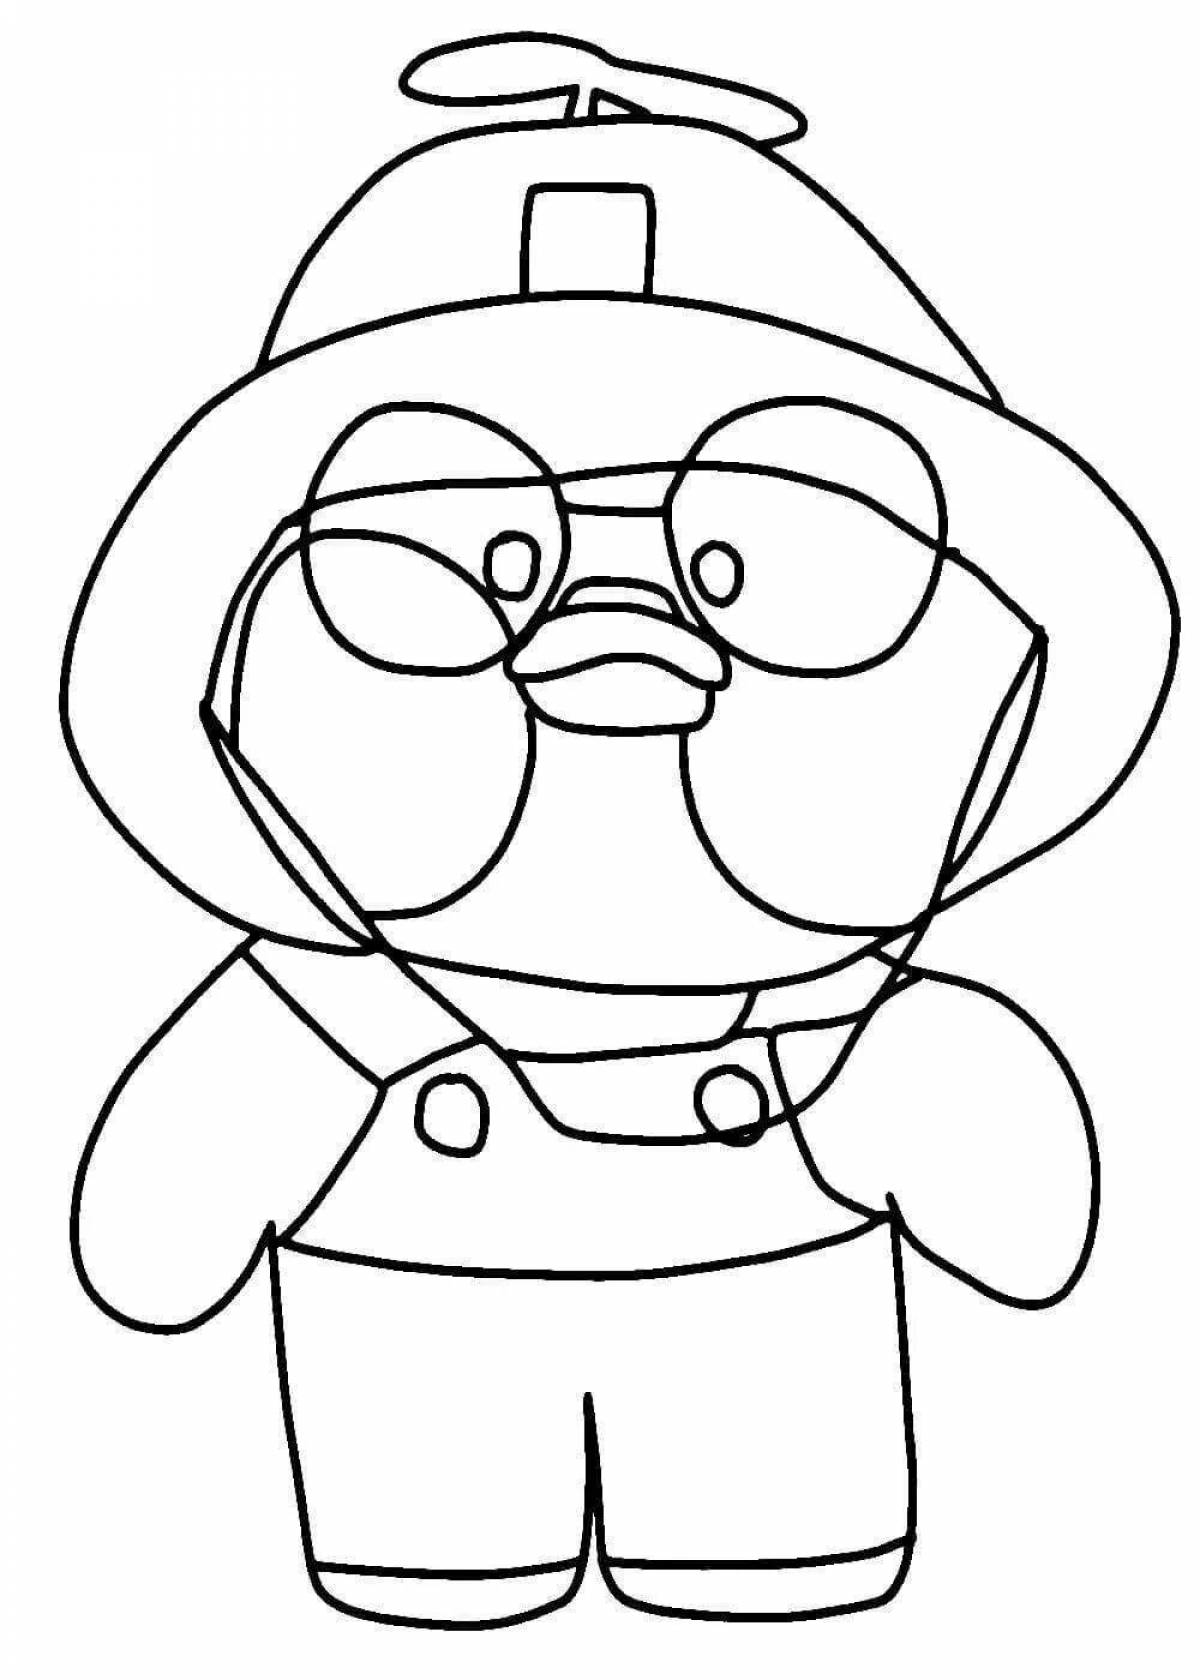 Color-zany fanfan duck coloring page